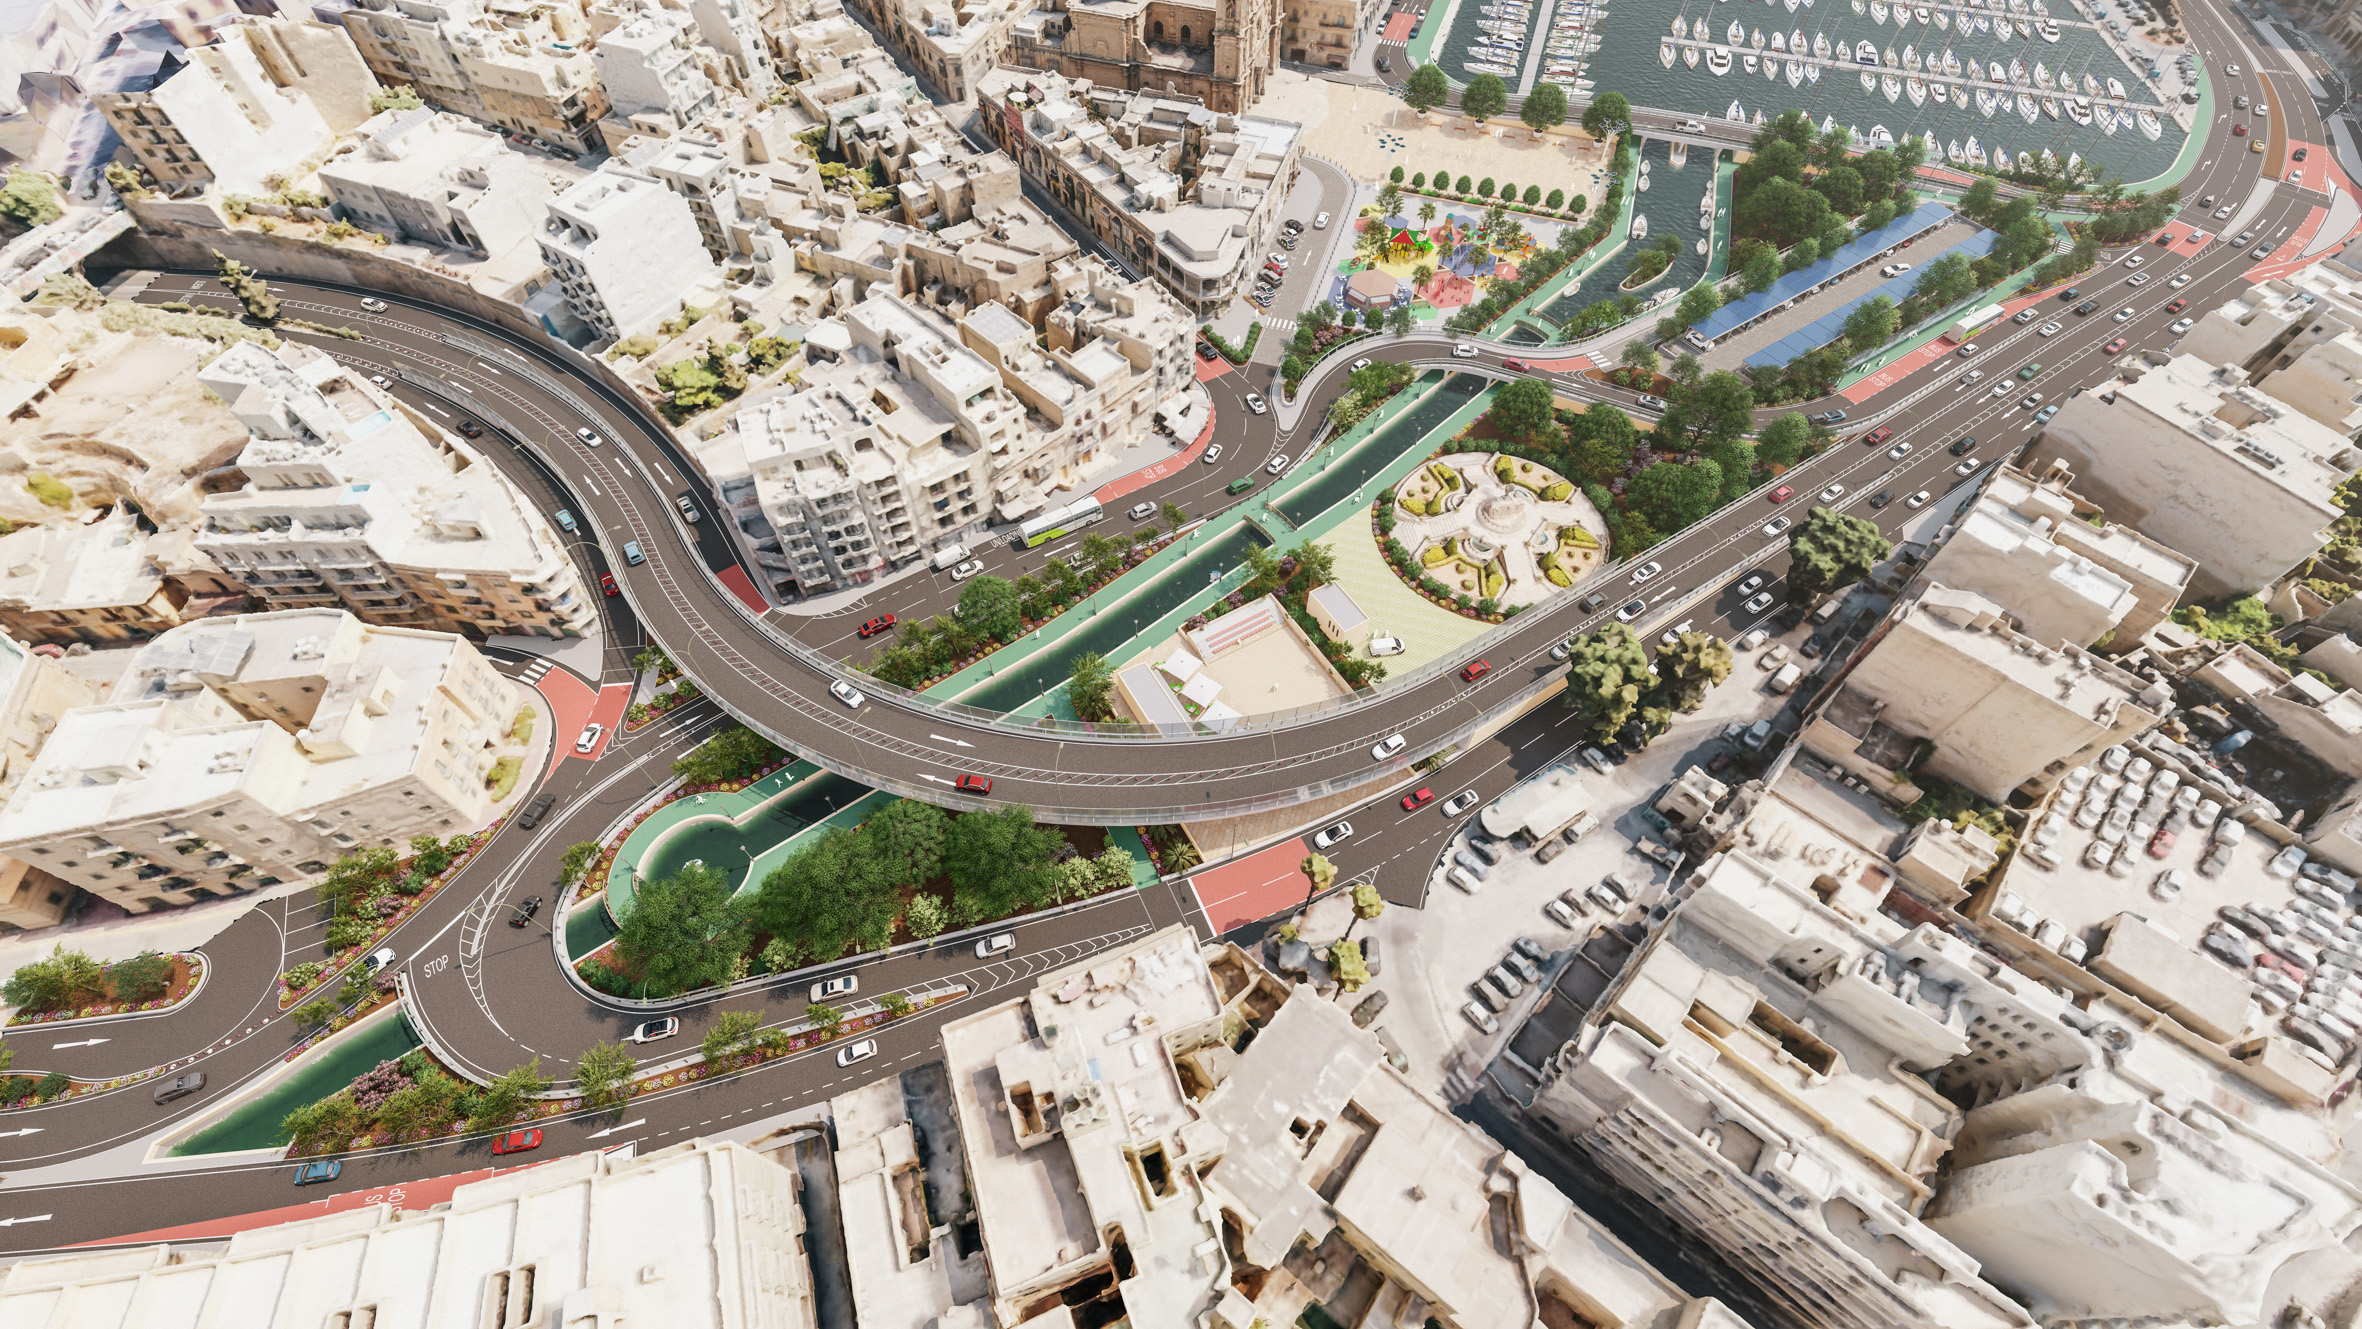 Infrastructure Malta announces conclusion of adjudication process for the Msida Creek Project